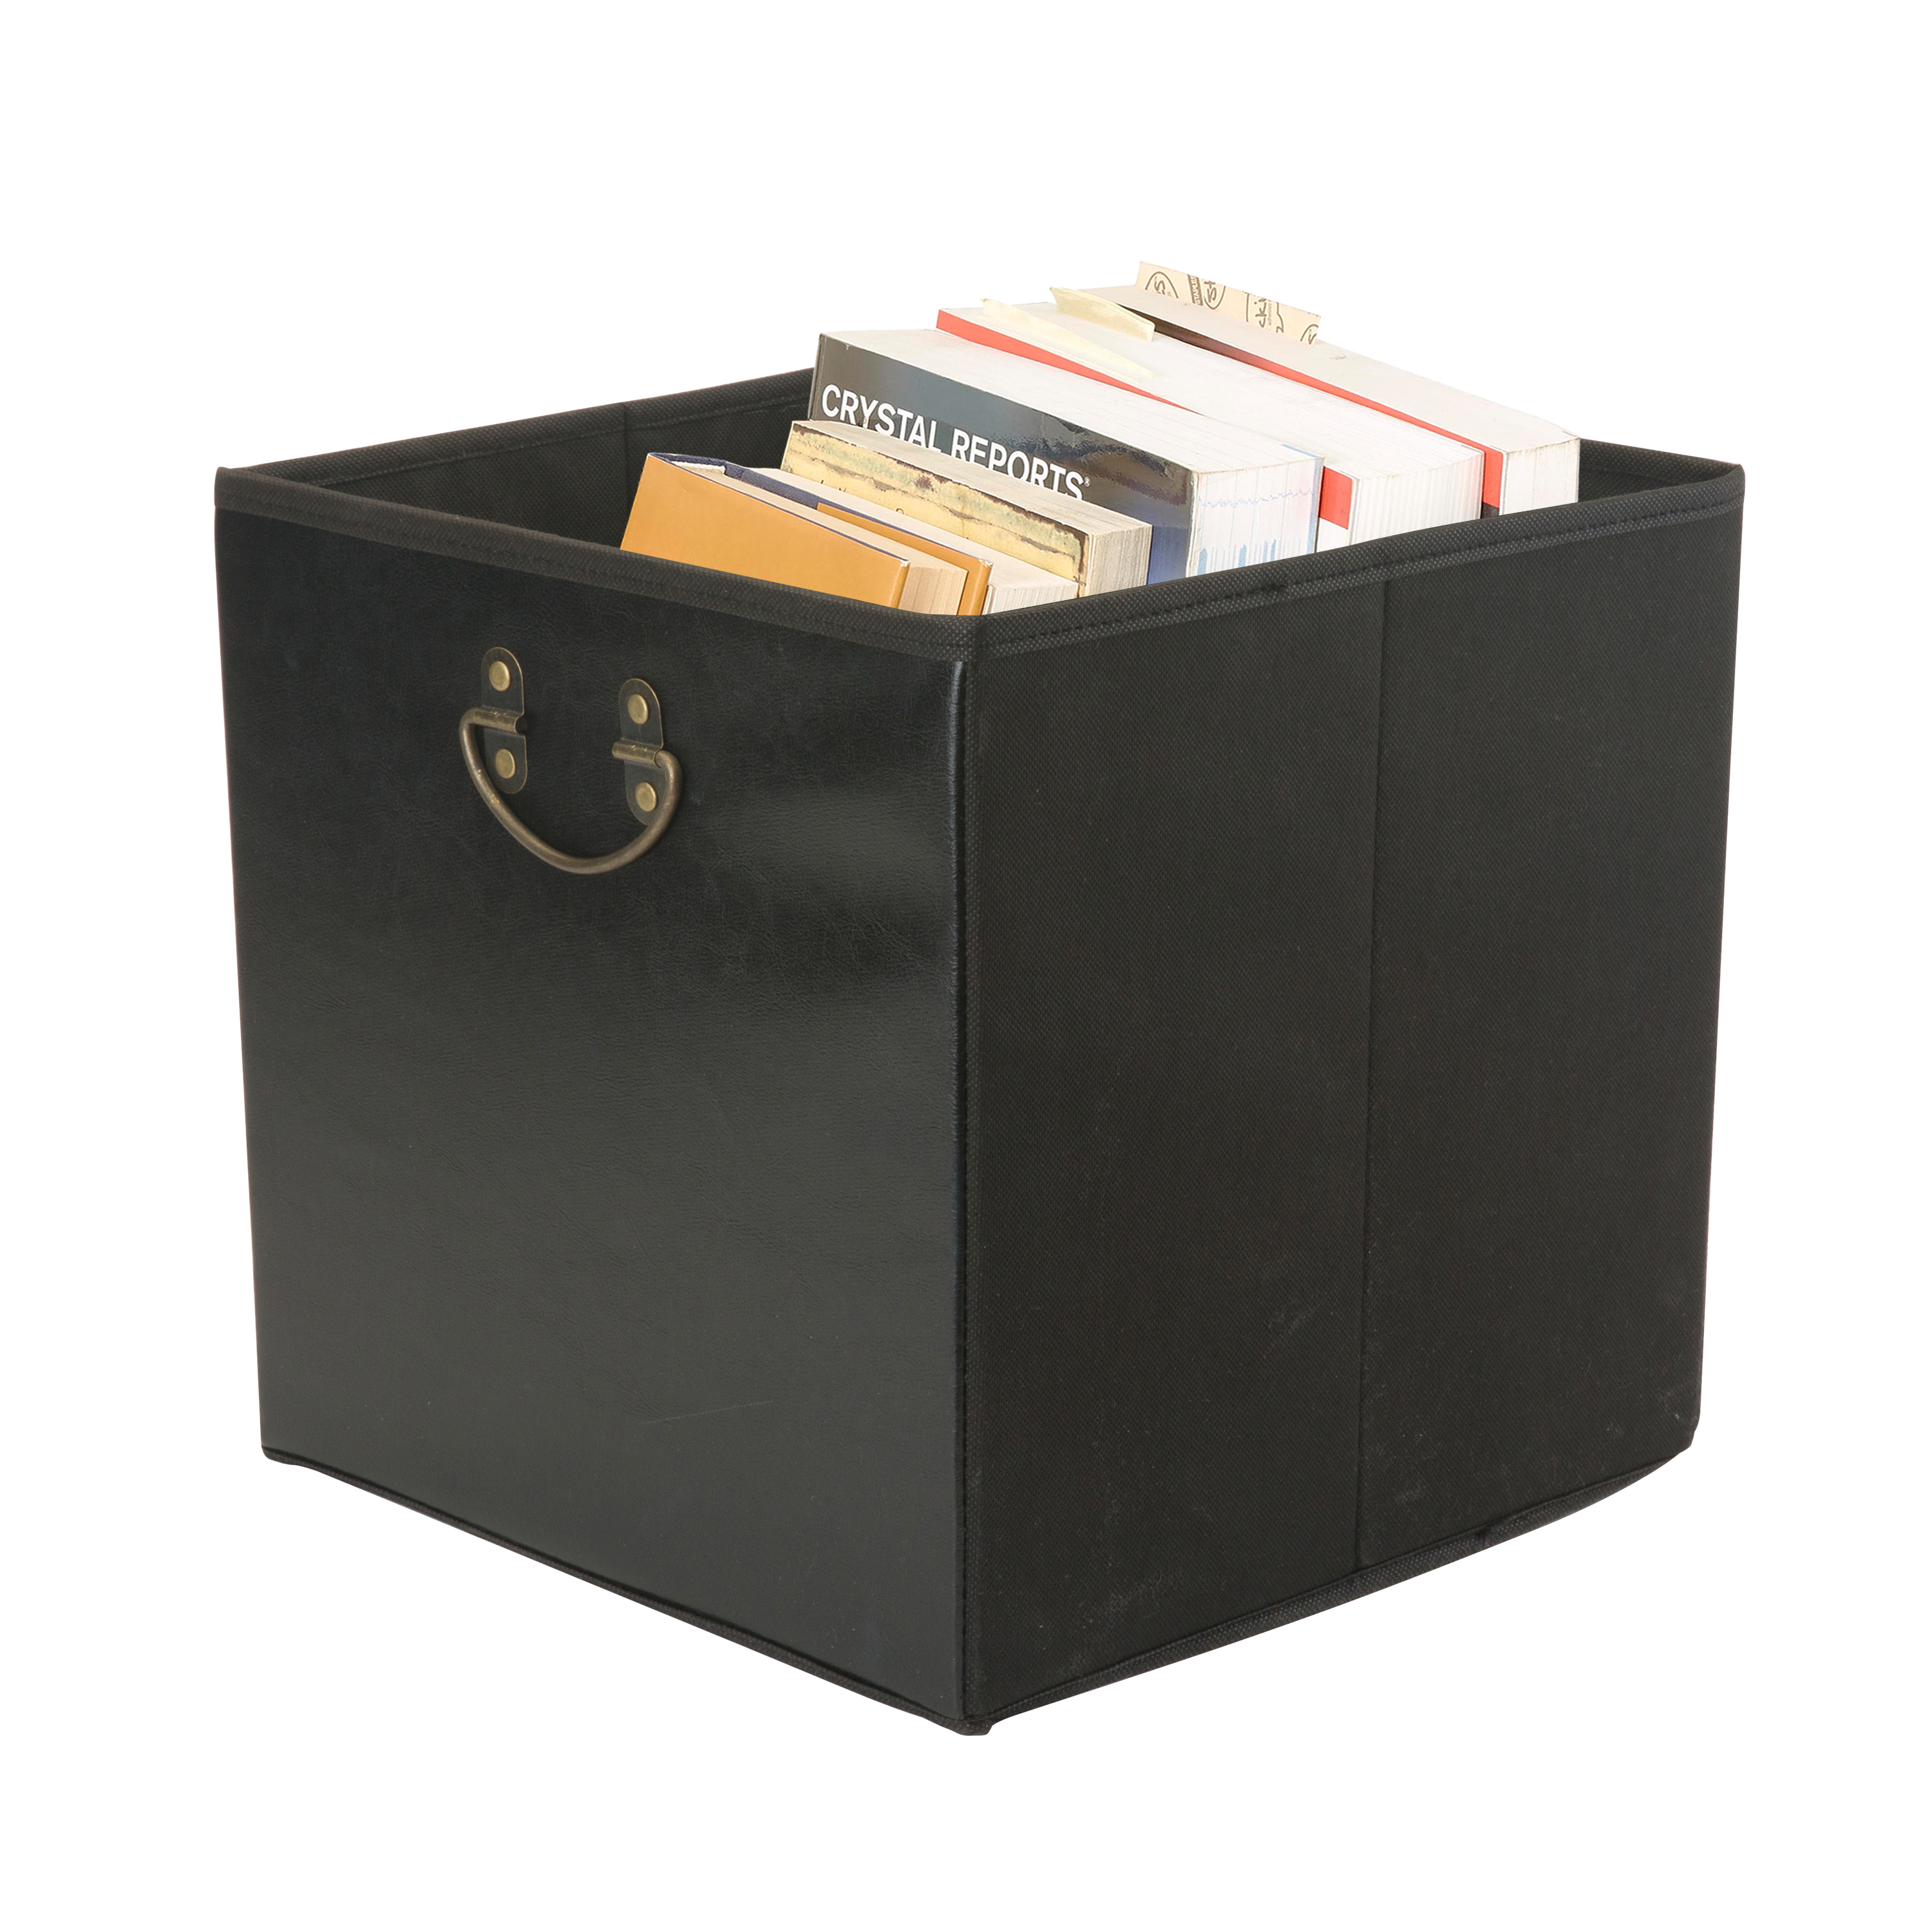 Faux Leather Storage Cube W Metal Handle 13x13x13 Walmart in proportions 3000 X 3000